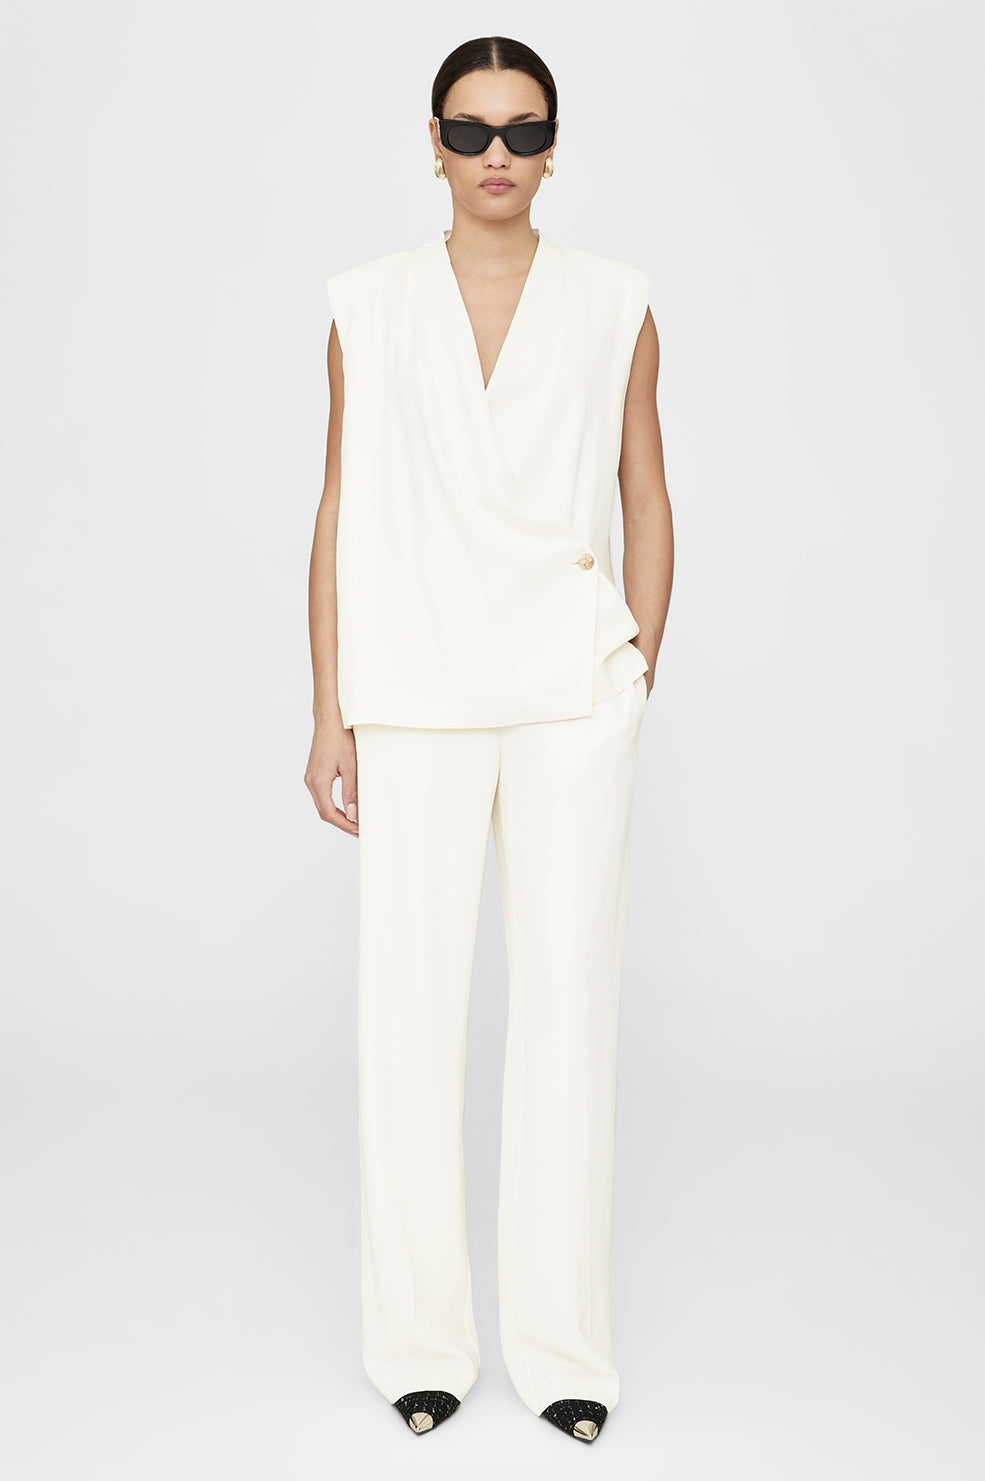 ANINE BING Soto Pant - Ivory - On Model Front